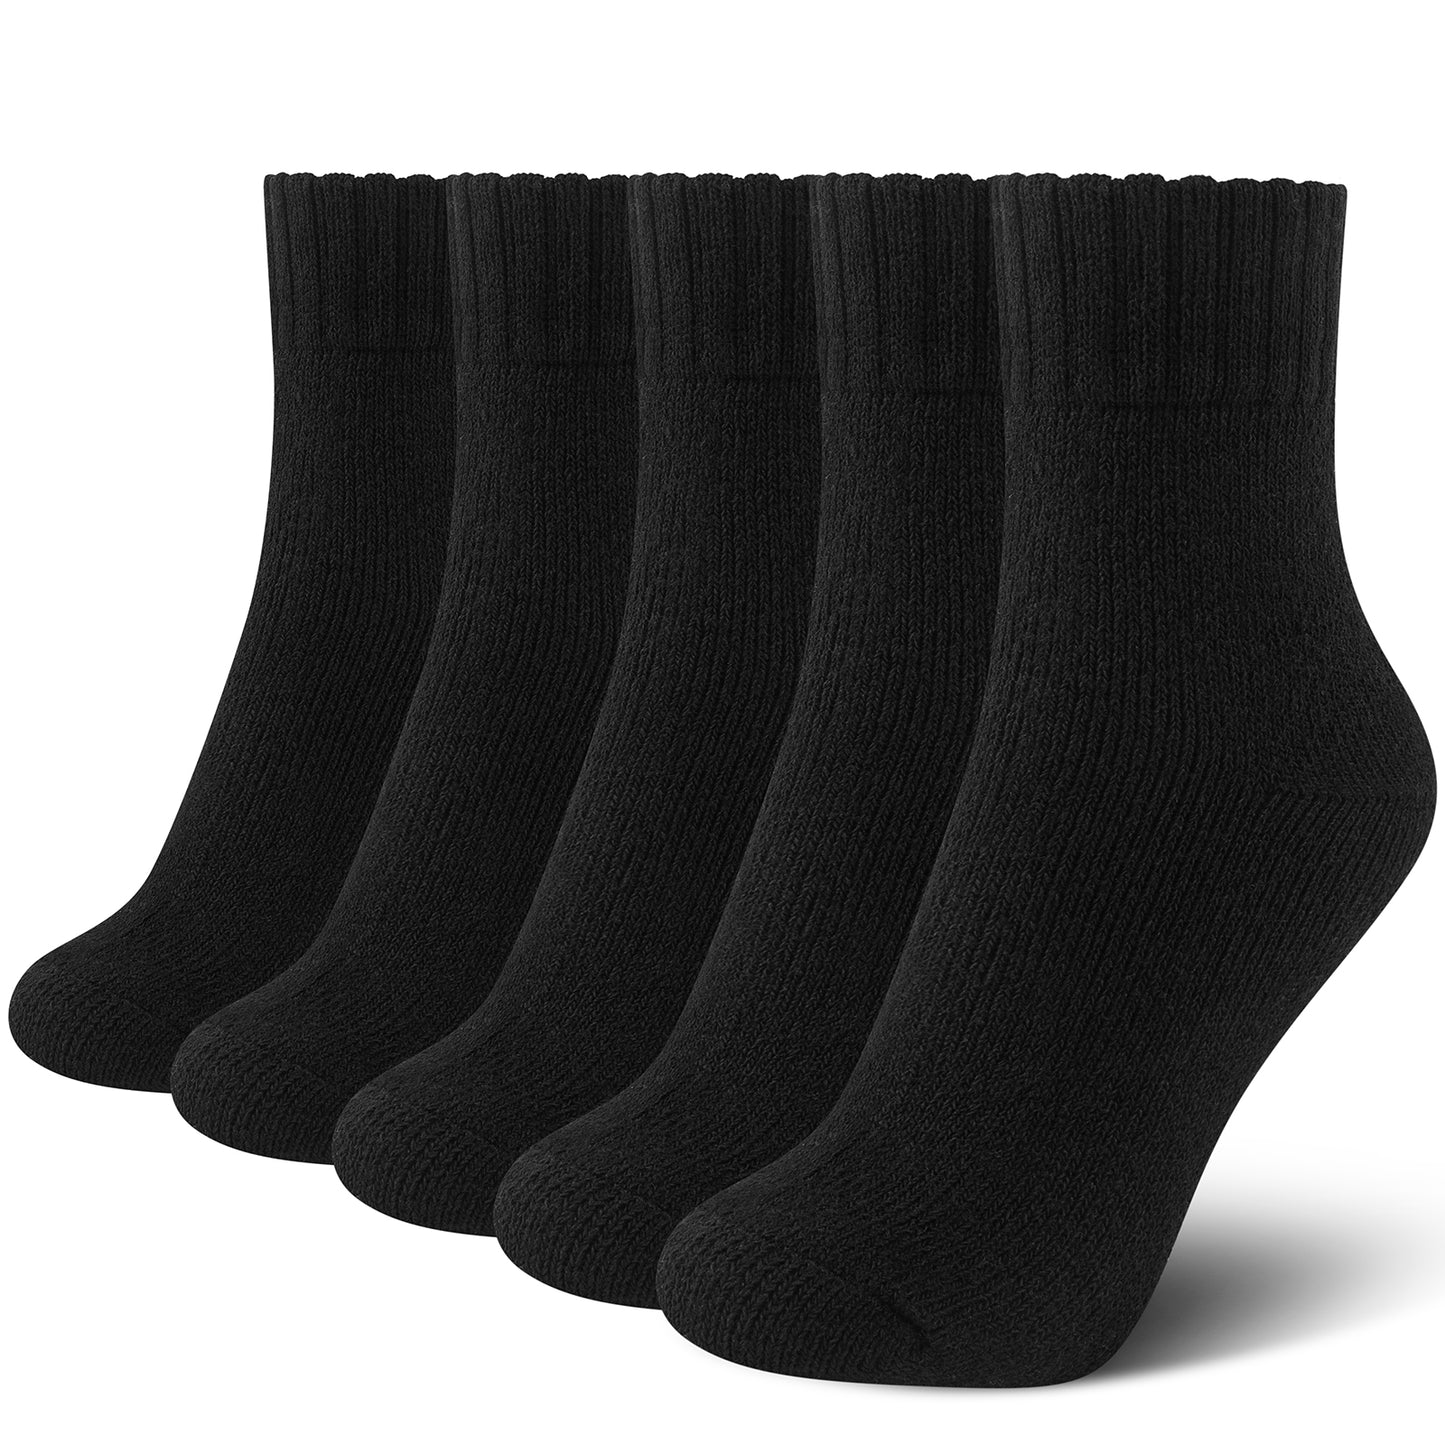 Loritta 5 Pairs Womens Wool Socks Thick Warm Winter Vintage Knit Thermal Gifts